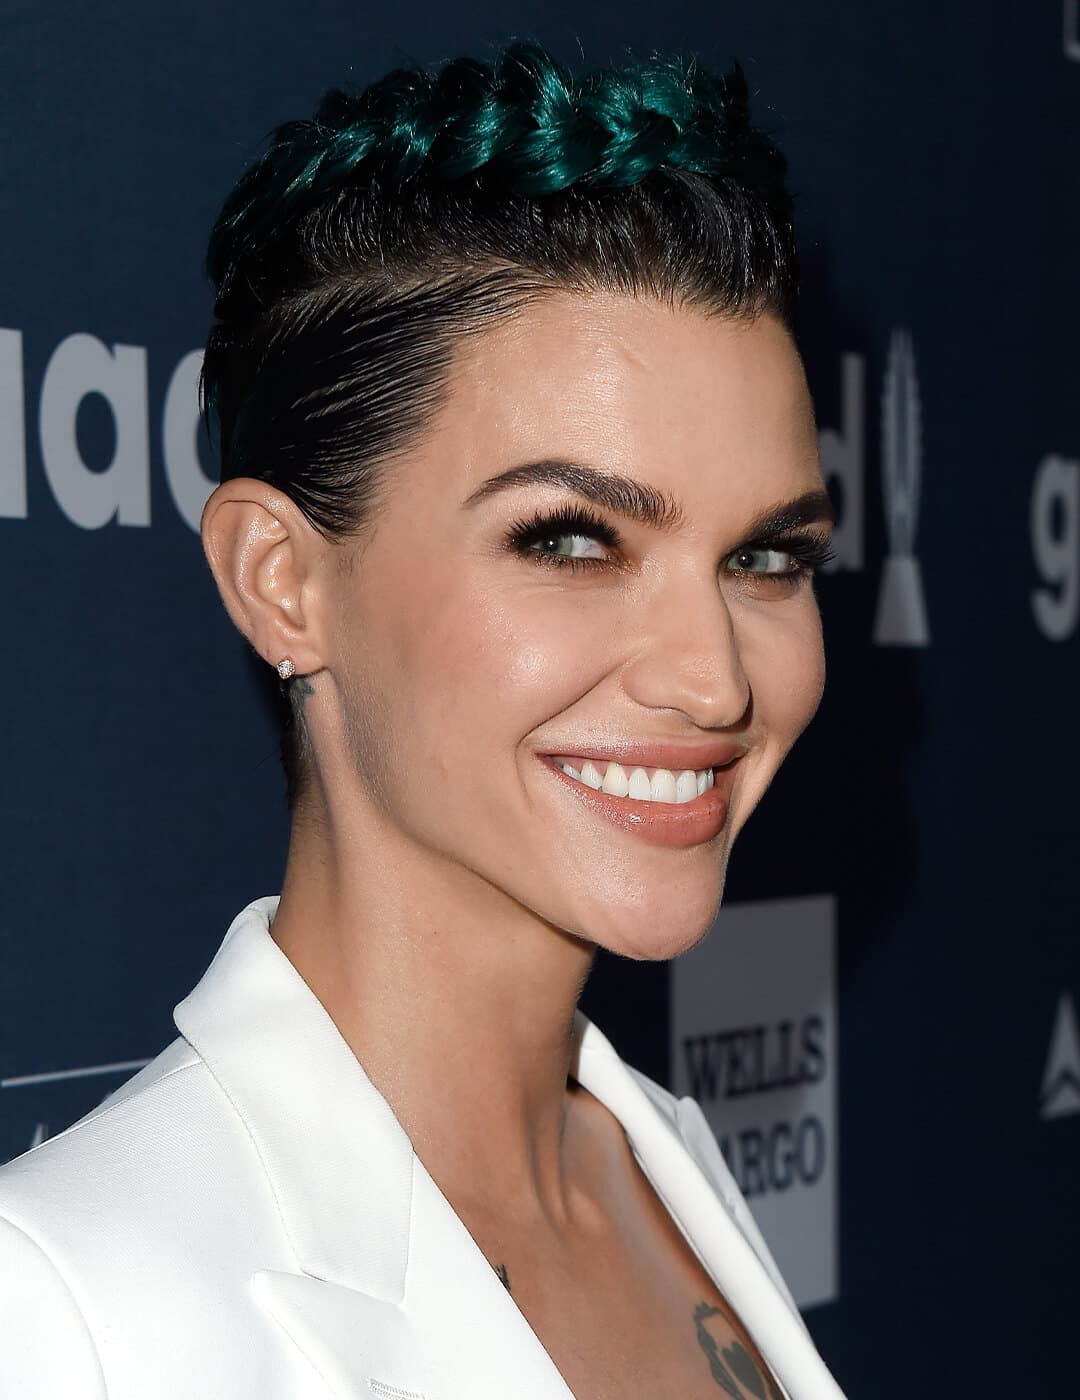 Smiling Ruby Rose rocking an undercut pixie hairstyle and smoky eye makeup look